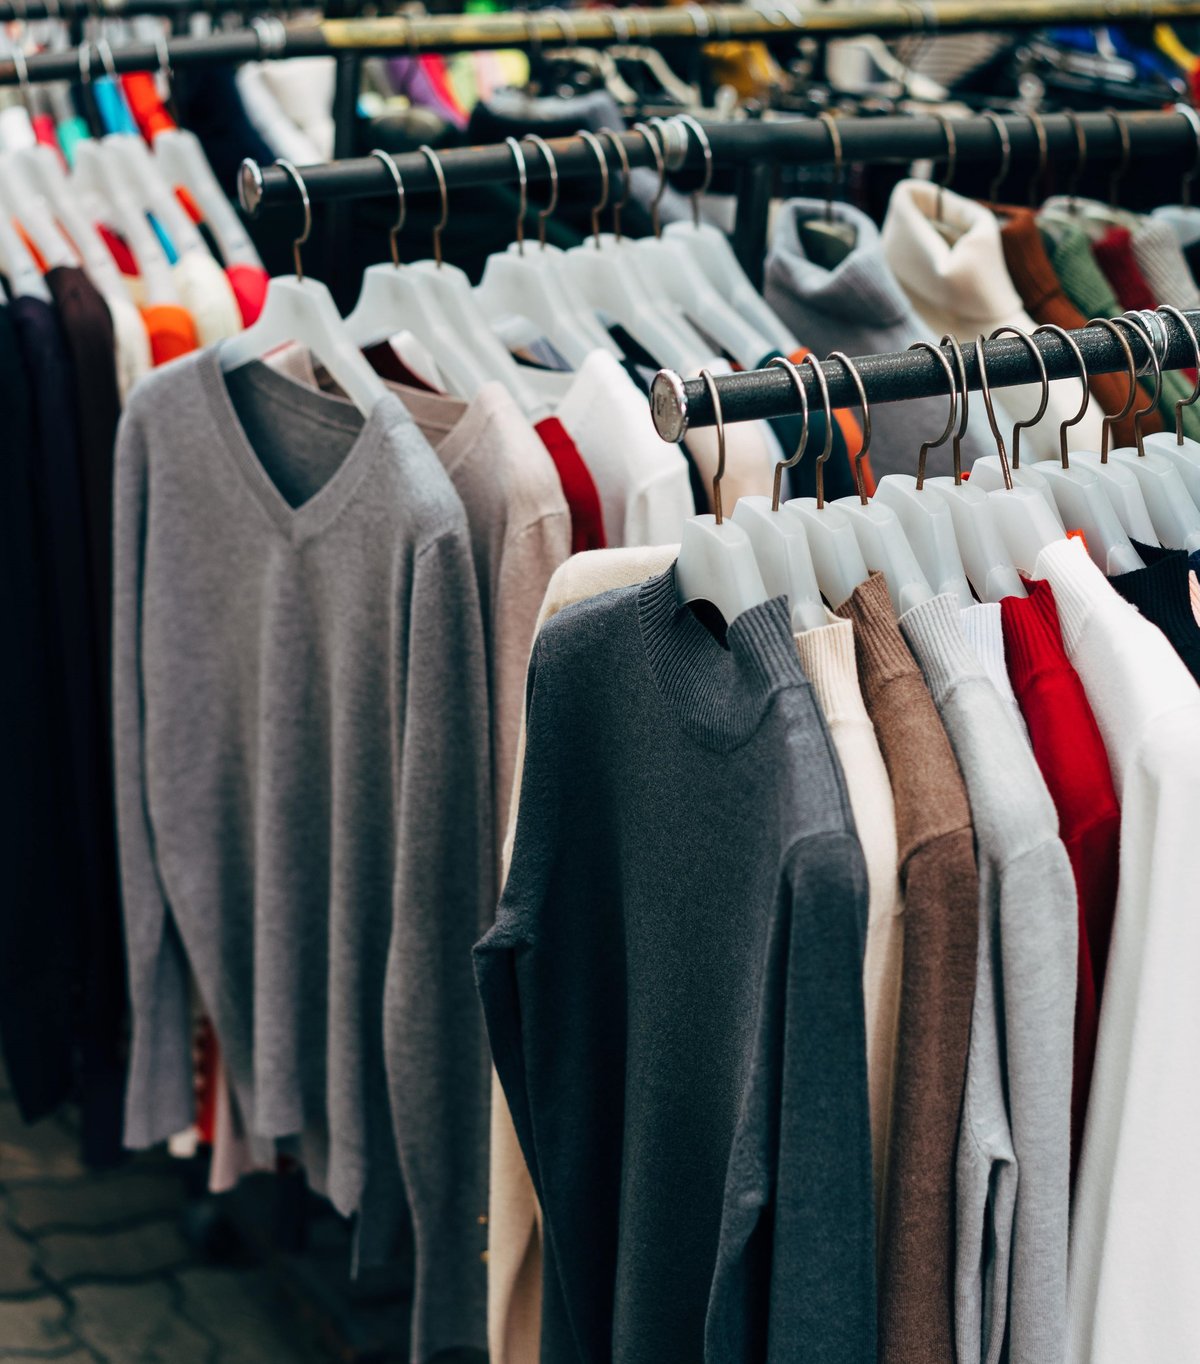 How to Compete With Fast Fashion: Go Seasonless, Be Sustainable